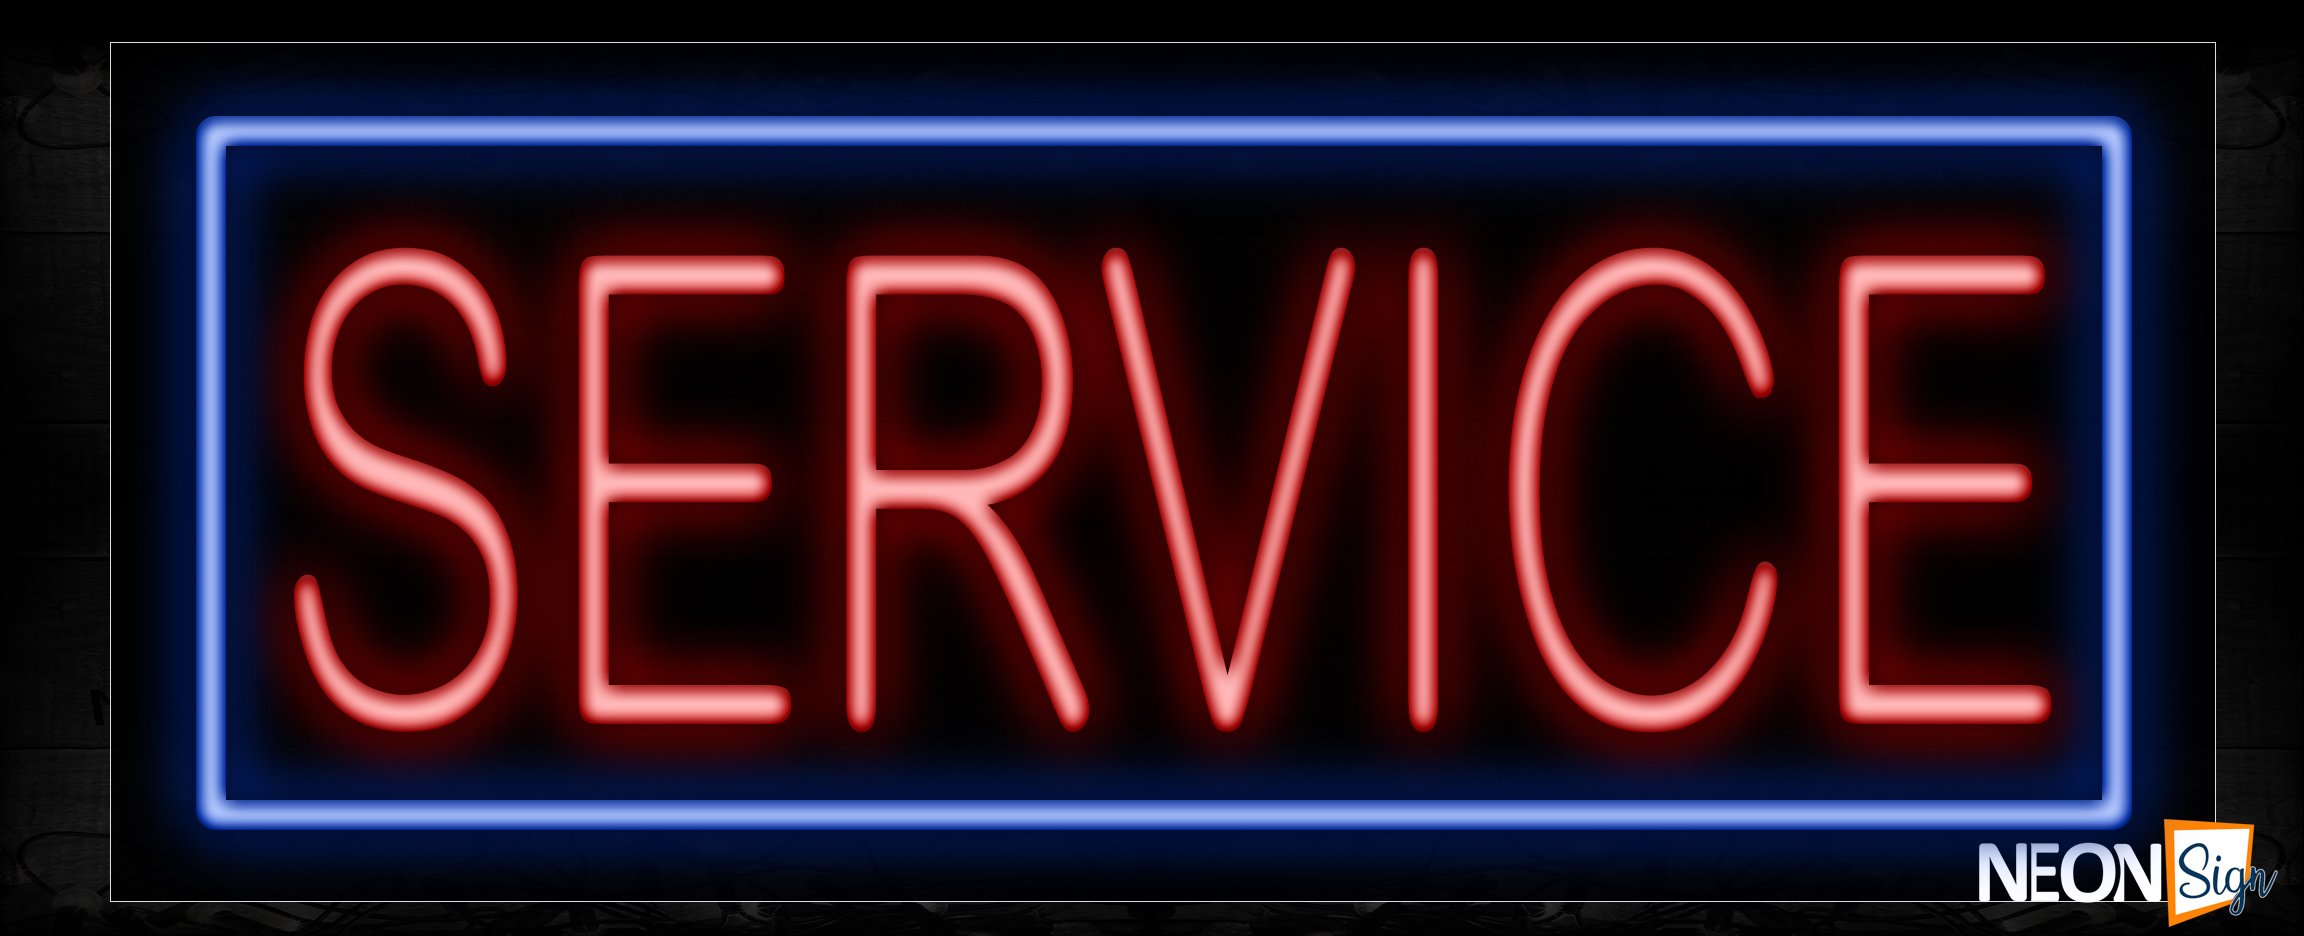 Image of 11473 Service in red with blue border Neon Sign_13x32 Black Backing